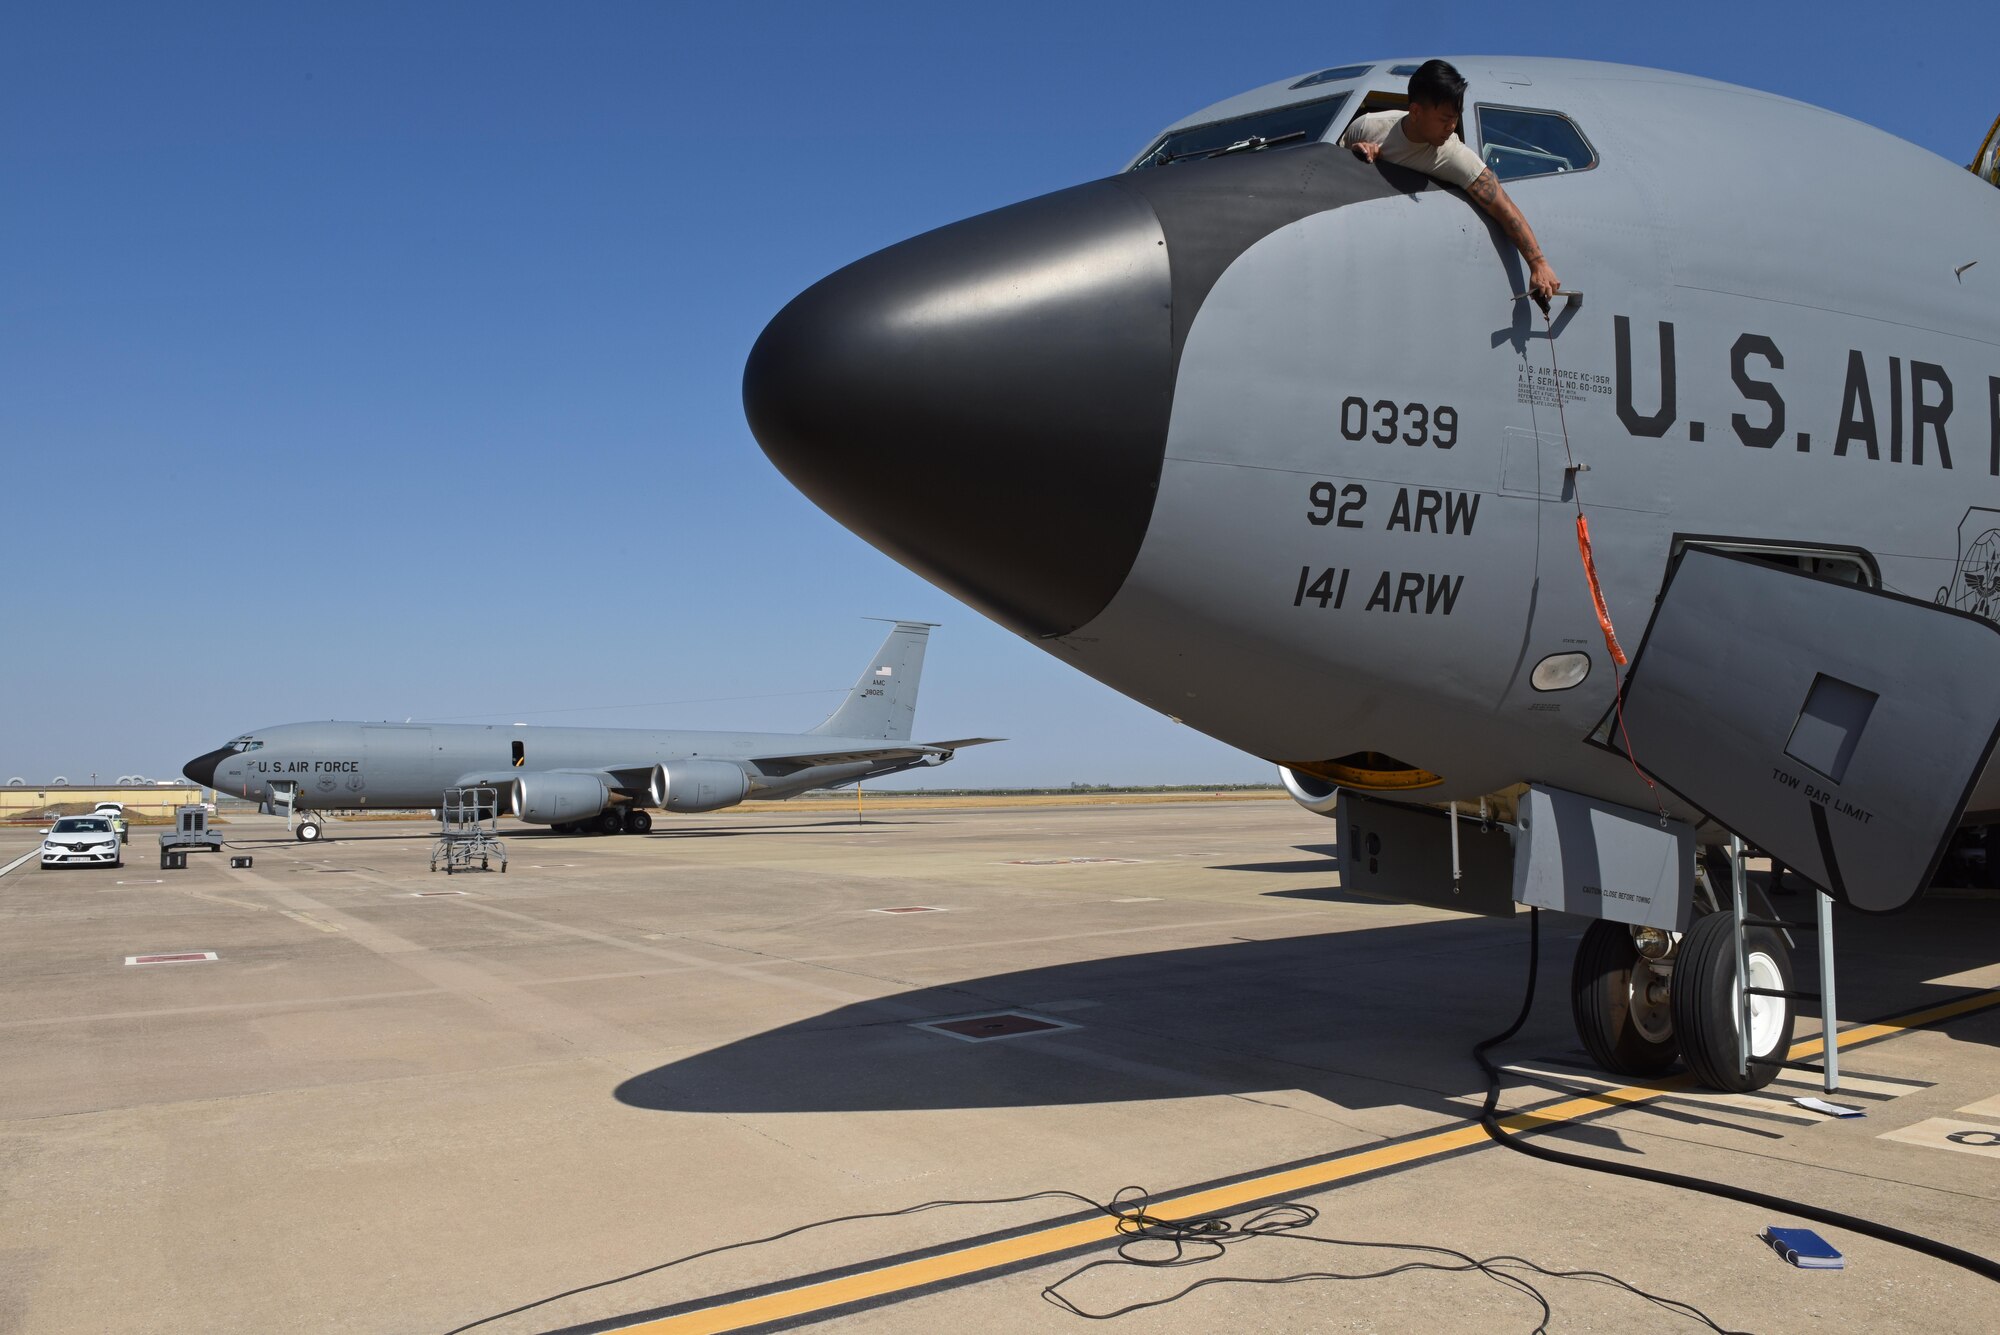 U.S. Air Force Staff Sgt. Mico Arenas, 92nd Aircraft Maintenance Squadron crew chief, places a 'remove before flight' safety warning tag onto a KC-135 Stratotanker at Moron Air Base, Spain, Sept. 6, 2019. Various Airmen from the 92nd Maintenance Group are deployed in support of Operation Juniper Micron, a counterterrorism operation stemming from a long-standing relationship between the U.S. and French governments dating back to 2013. (U.S. Air Force photo by Staff Sgt. Nick J. Daniello)